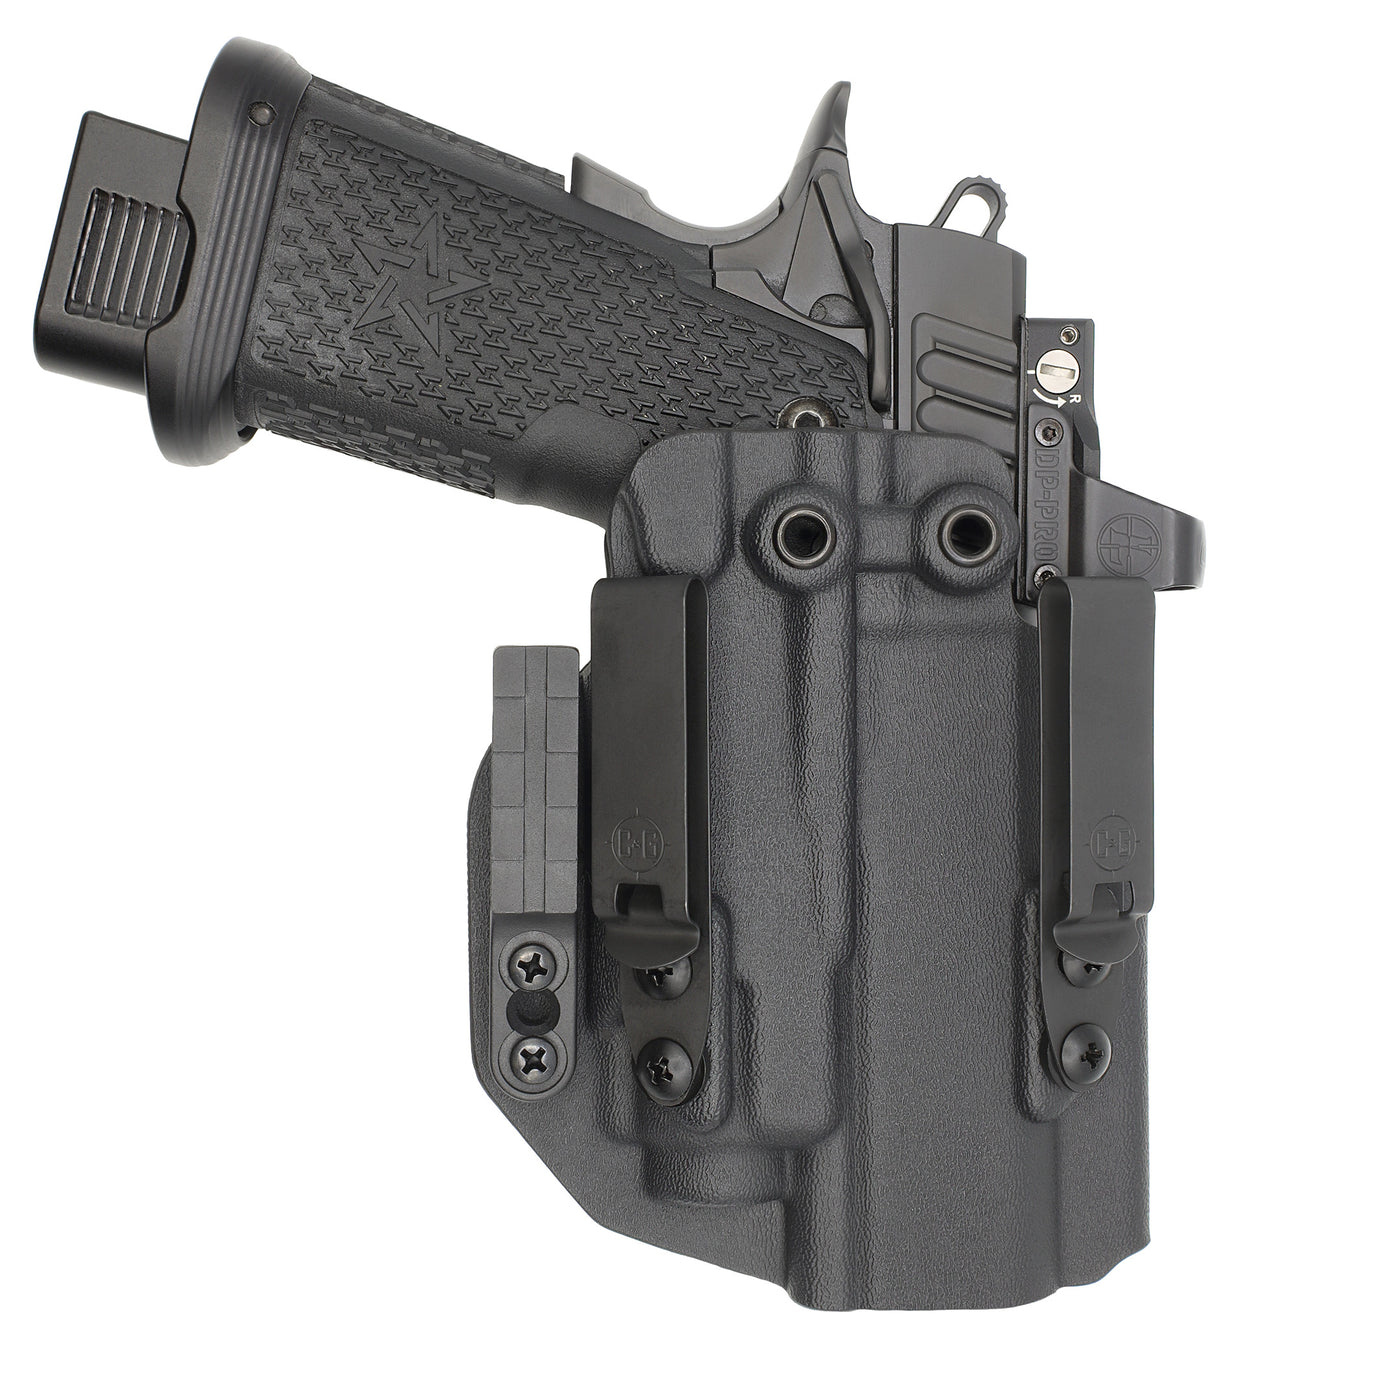 C&G Holsters custom IWB ALPHA UPGRADE Tactical 1911 DS Prodigy streamlight TLR8 holstered